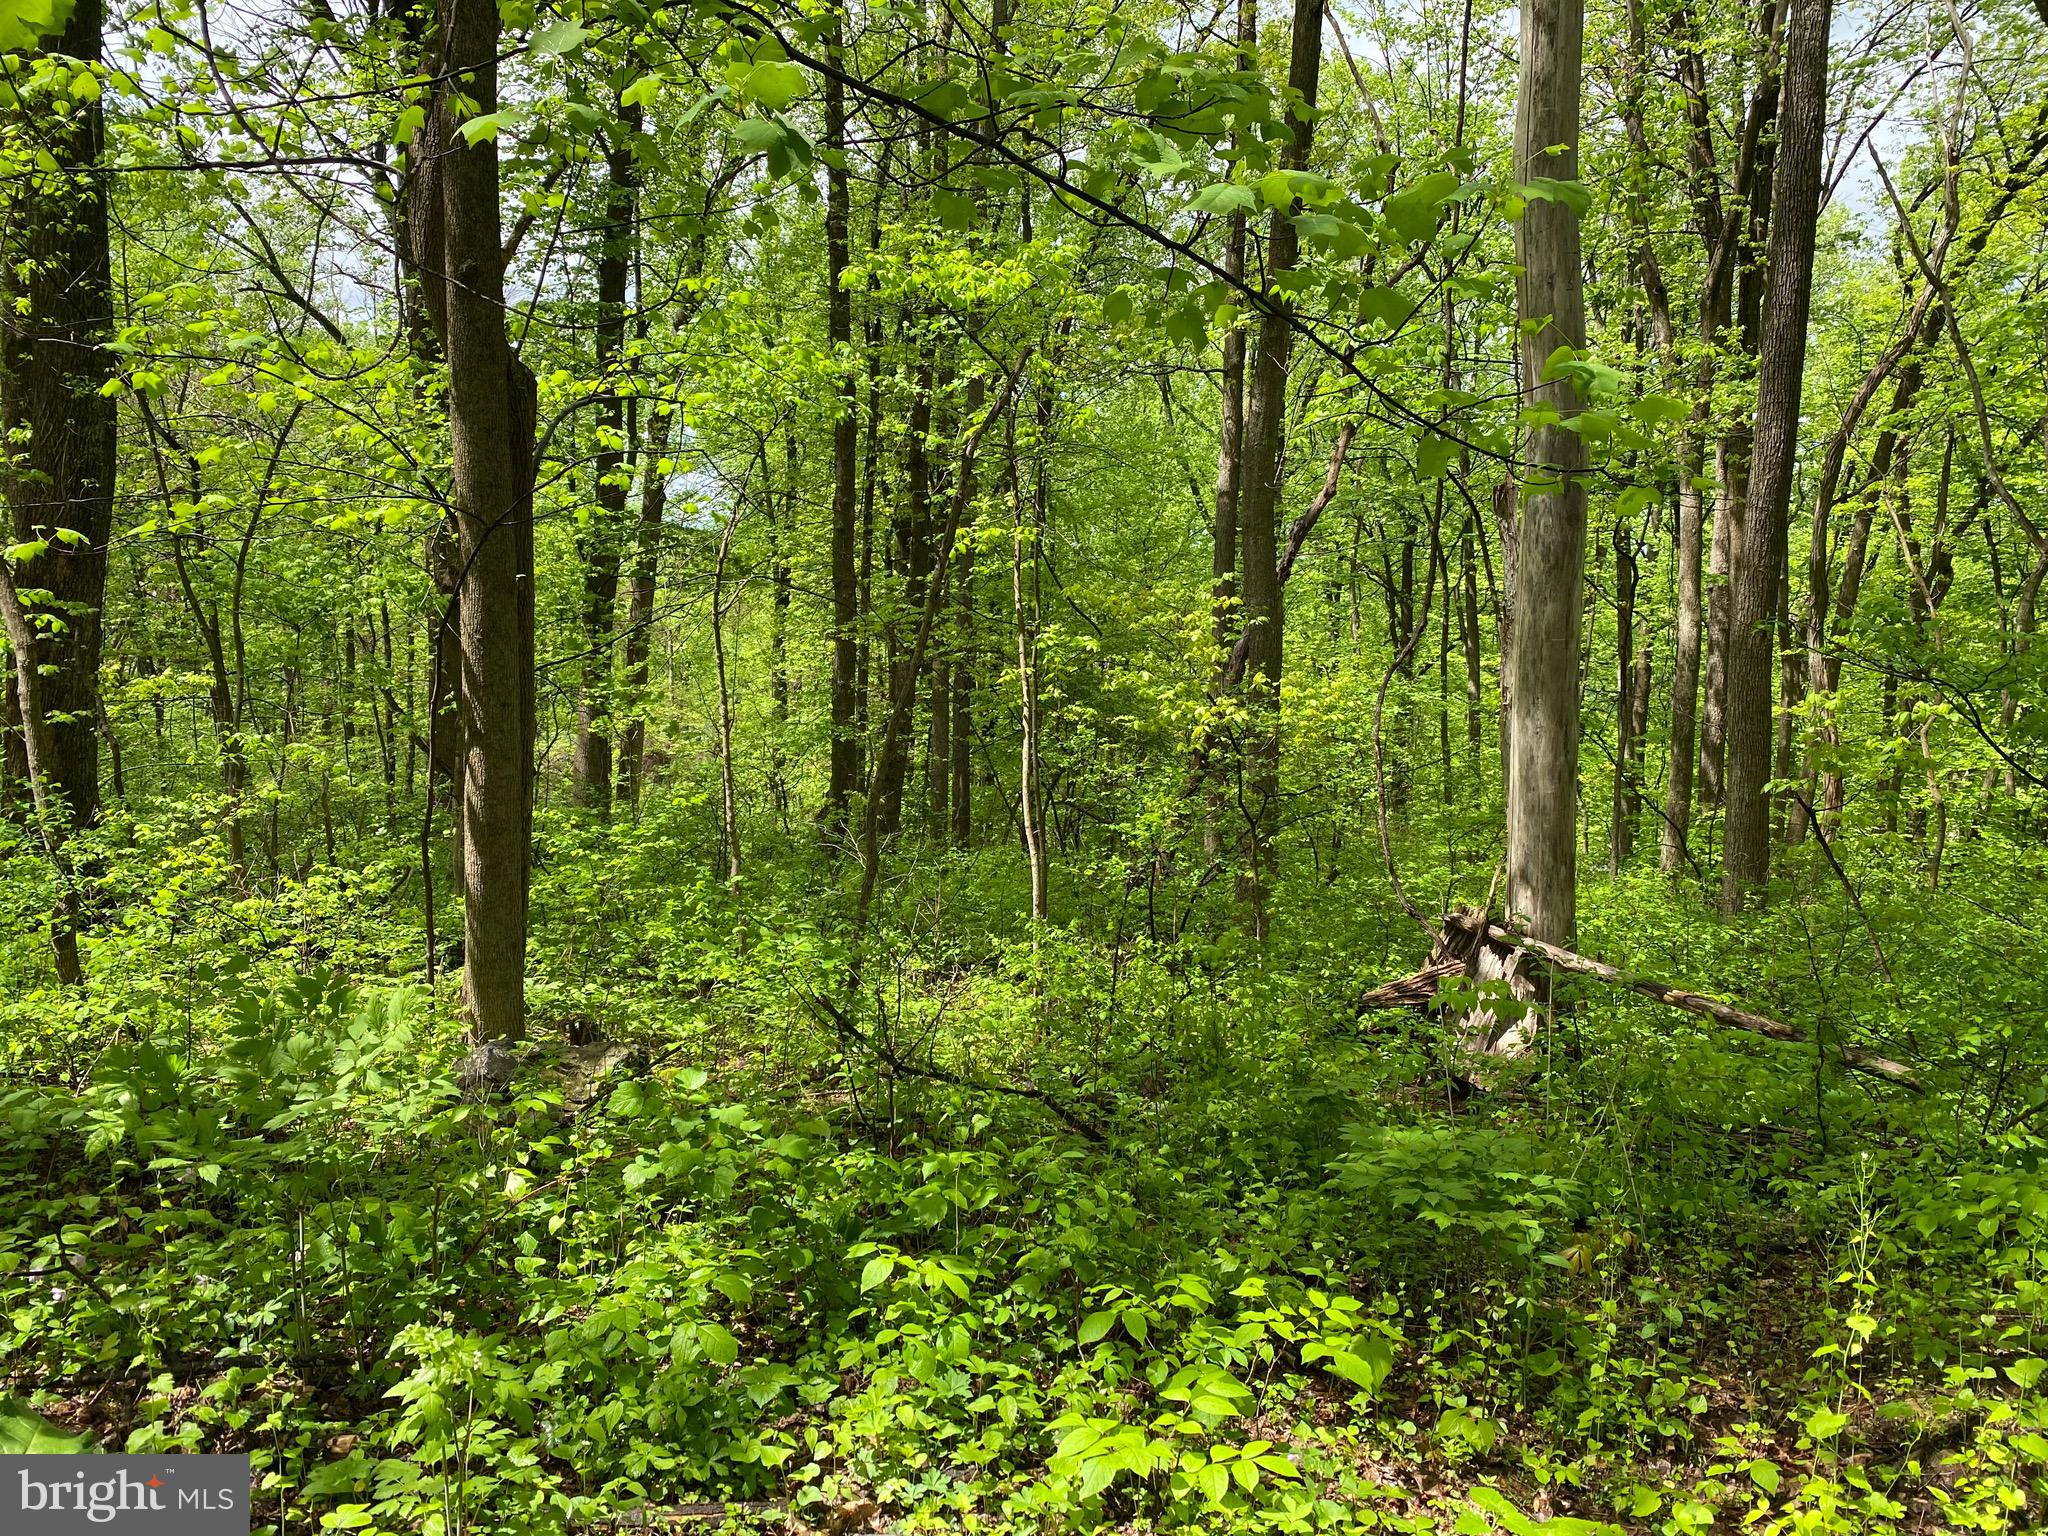 a view of a lush green forest